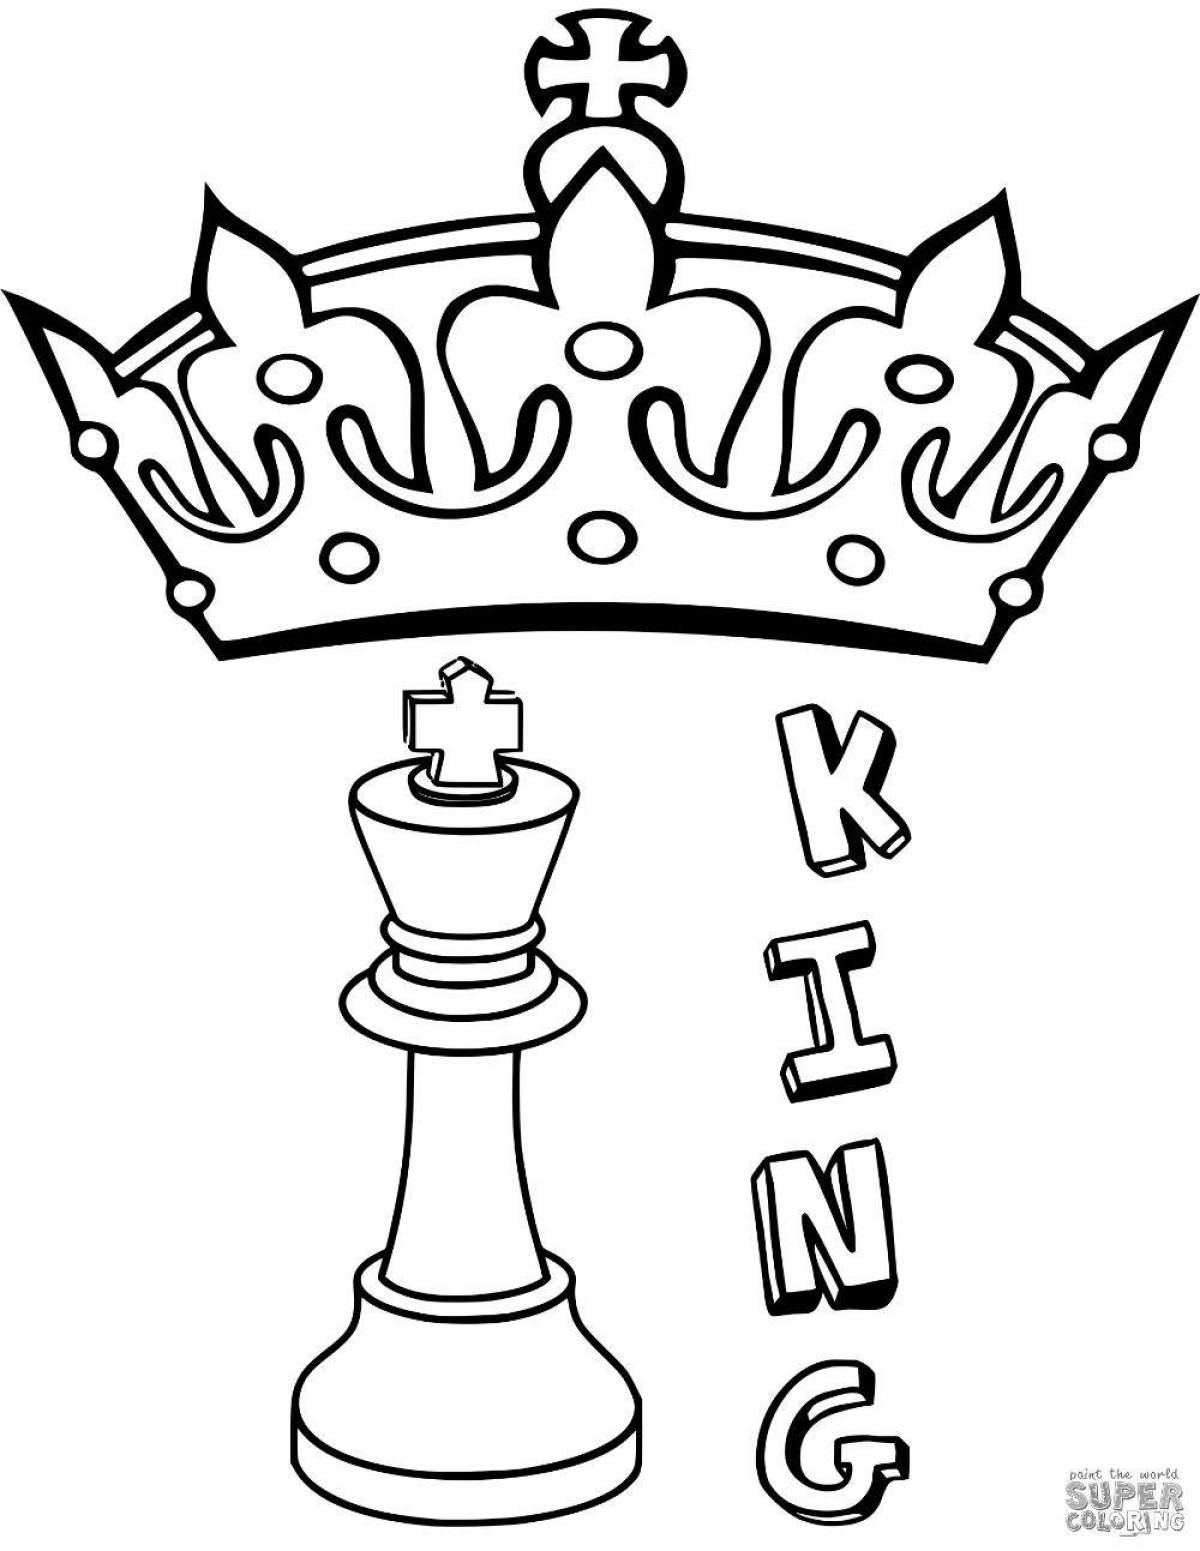 Exciting chess coloring